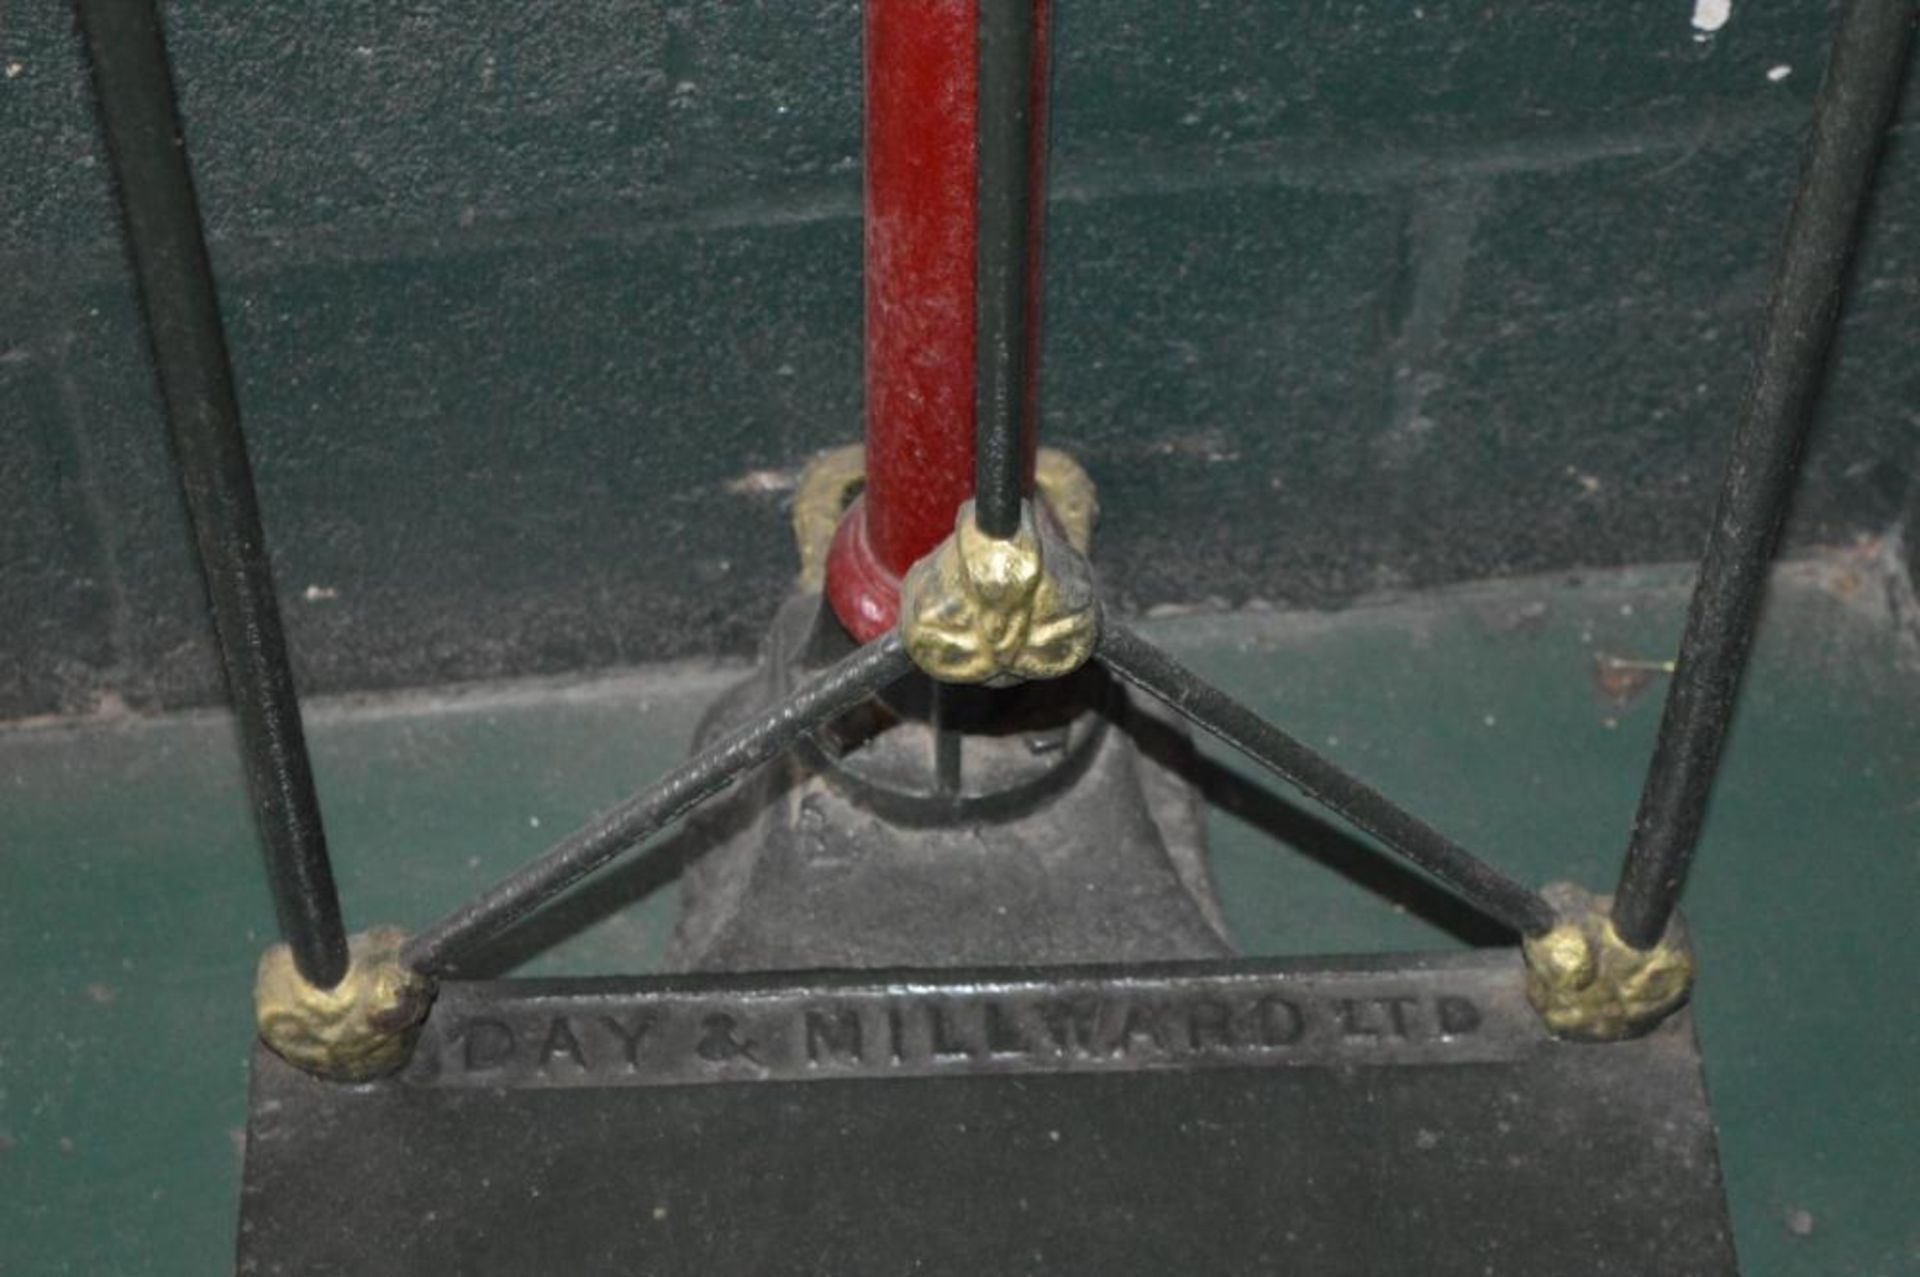 1 x Antique Floor Standing Weighing Scales by Day & Millward of Birmingham - Platform Size 24 x 24 - Image 3 of 4